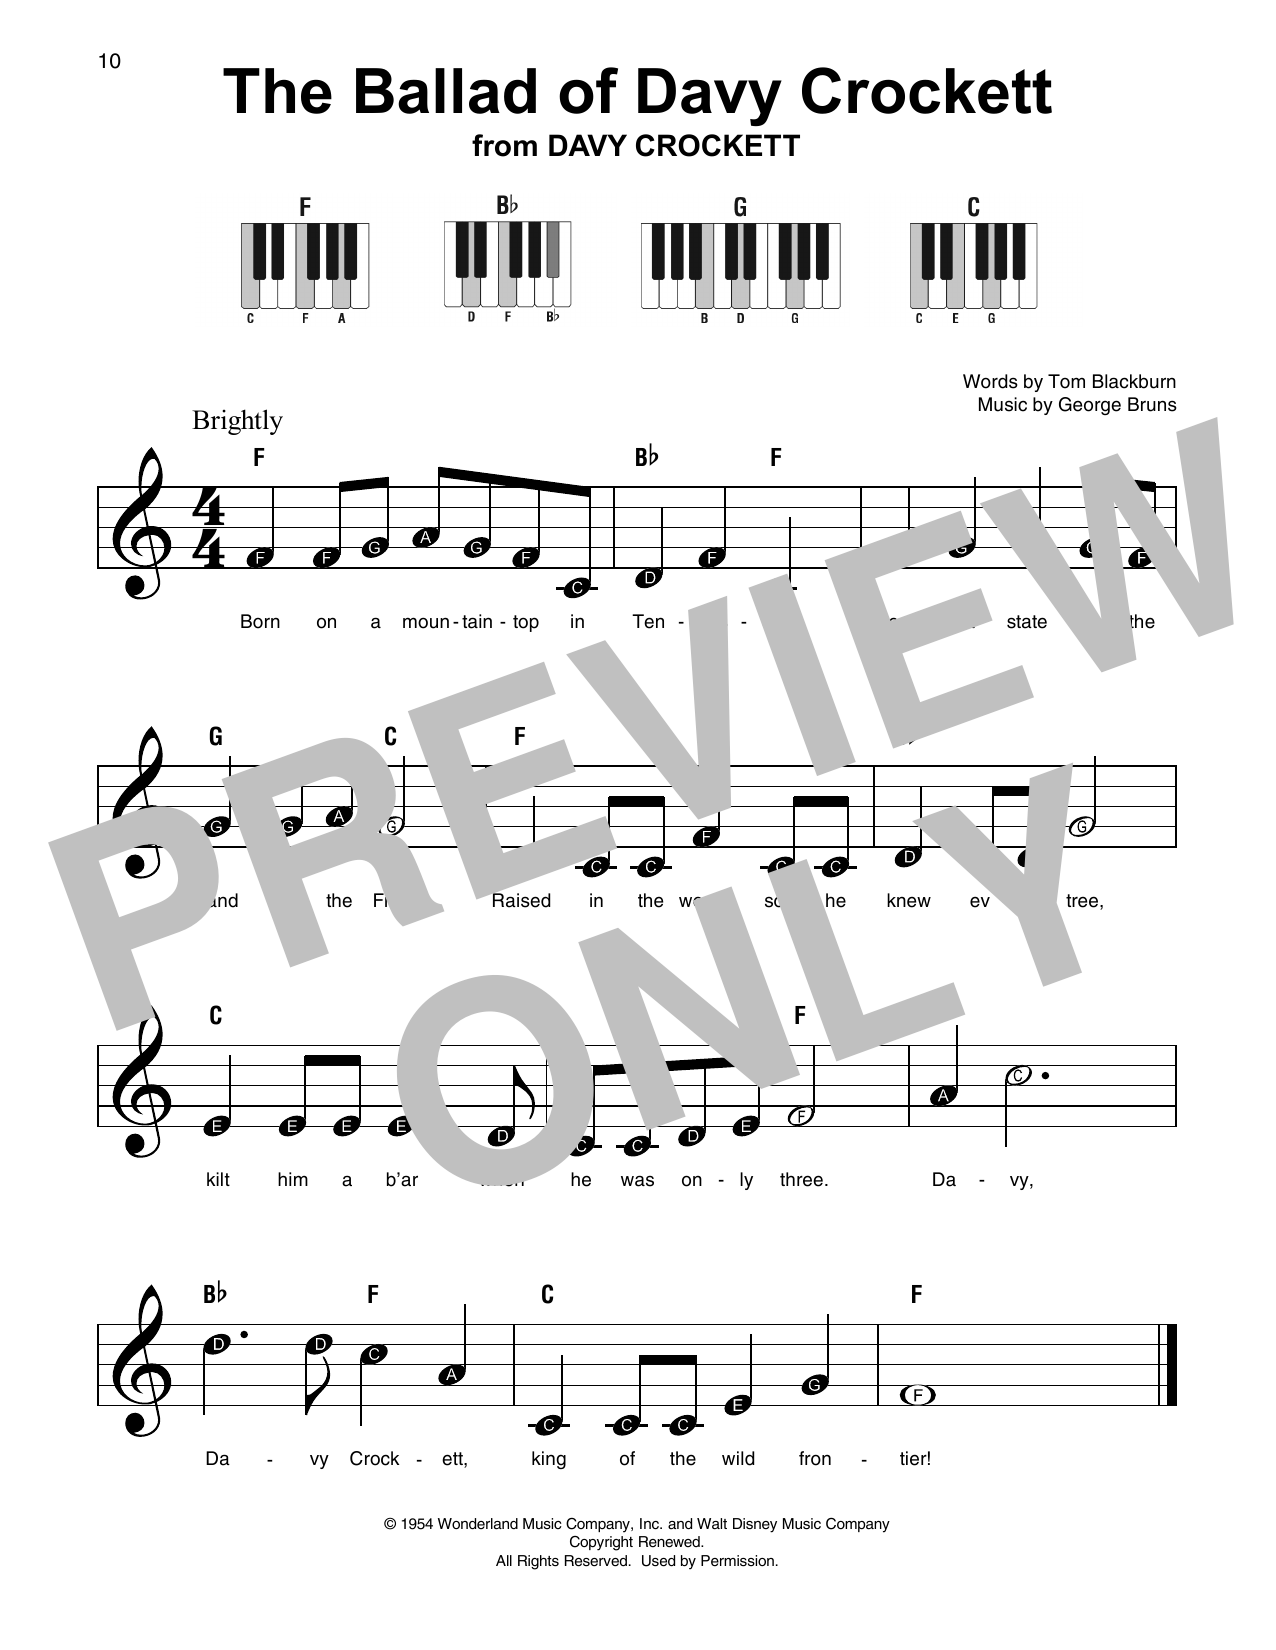 Download Tennessee Ernie Ford The Ballad Of Davy Crockett Sheet Music